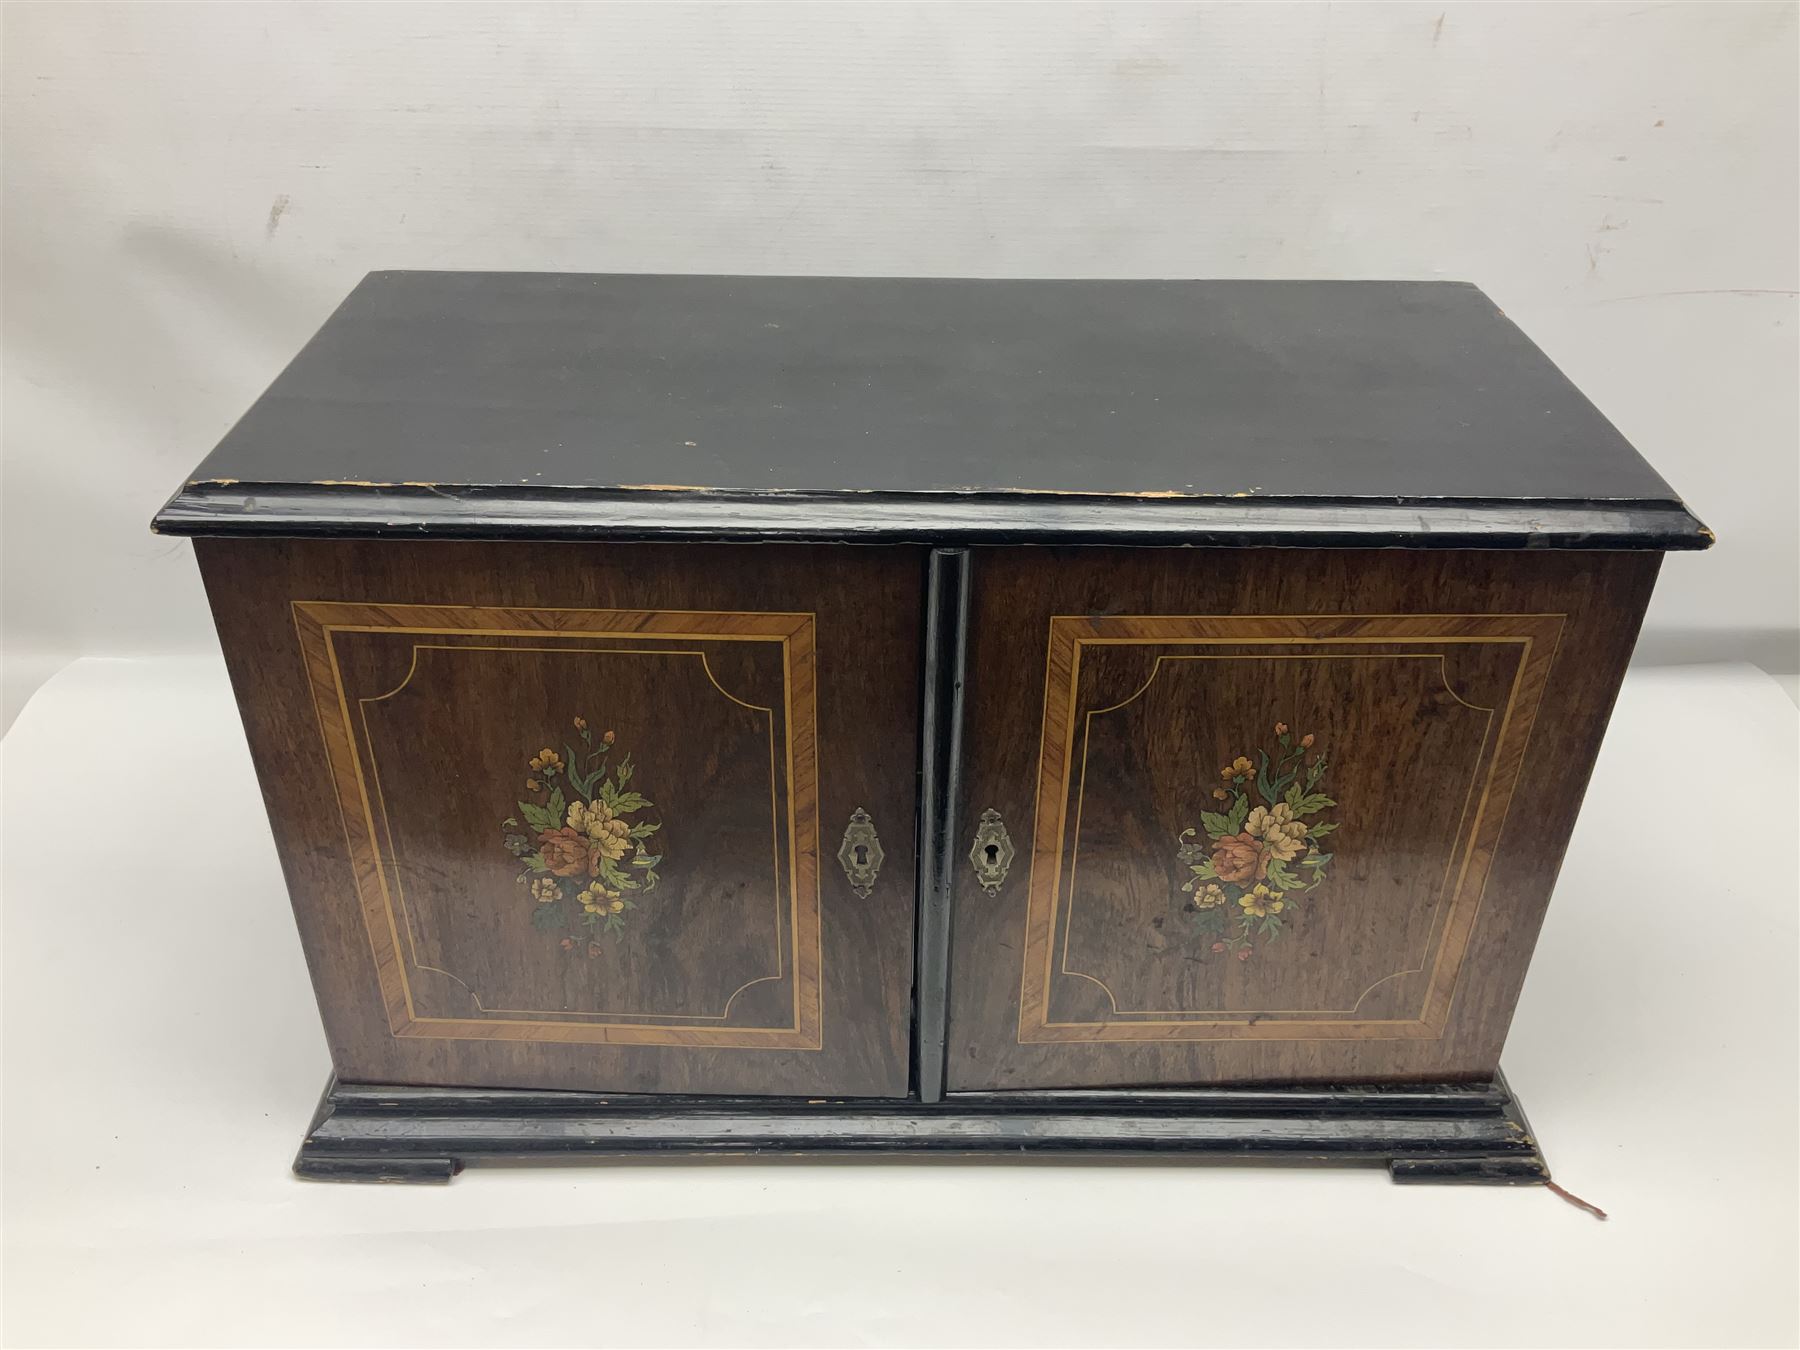 Swiss - 19th-century cylinder music box in a mahogany "buffet" style case with inlaid door panels - Image 11 of 13